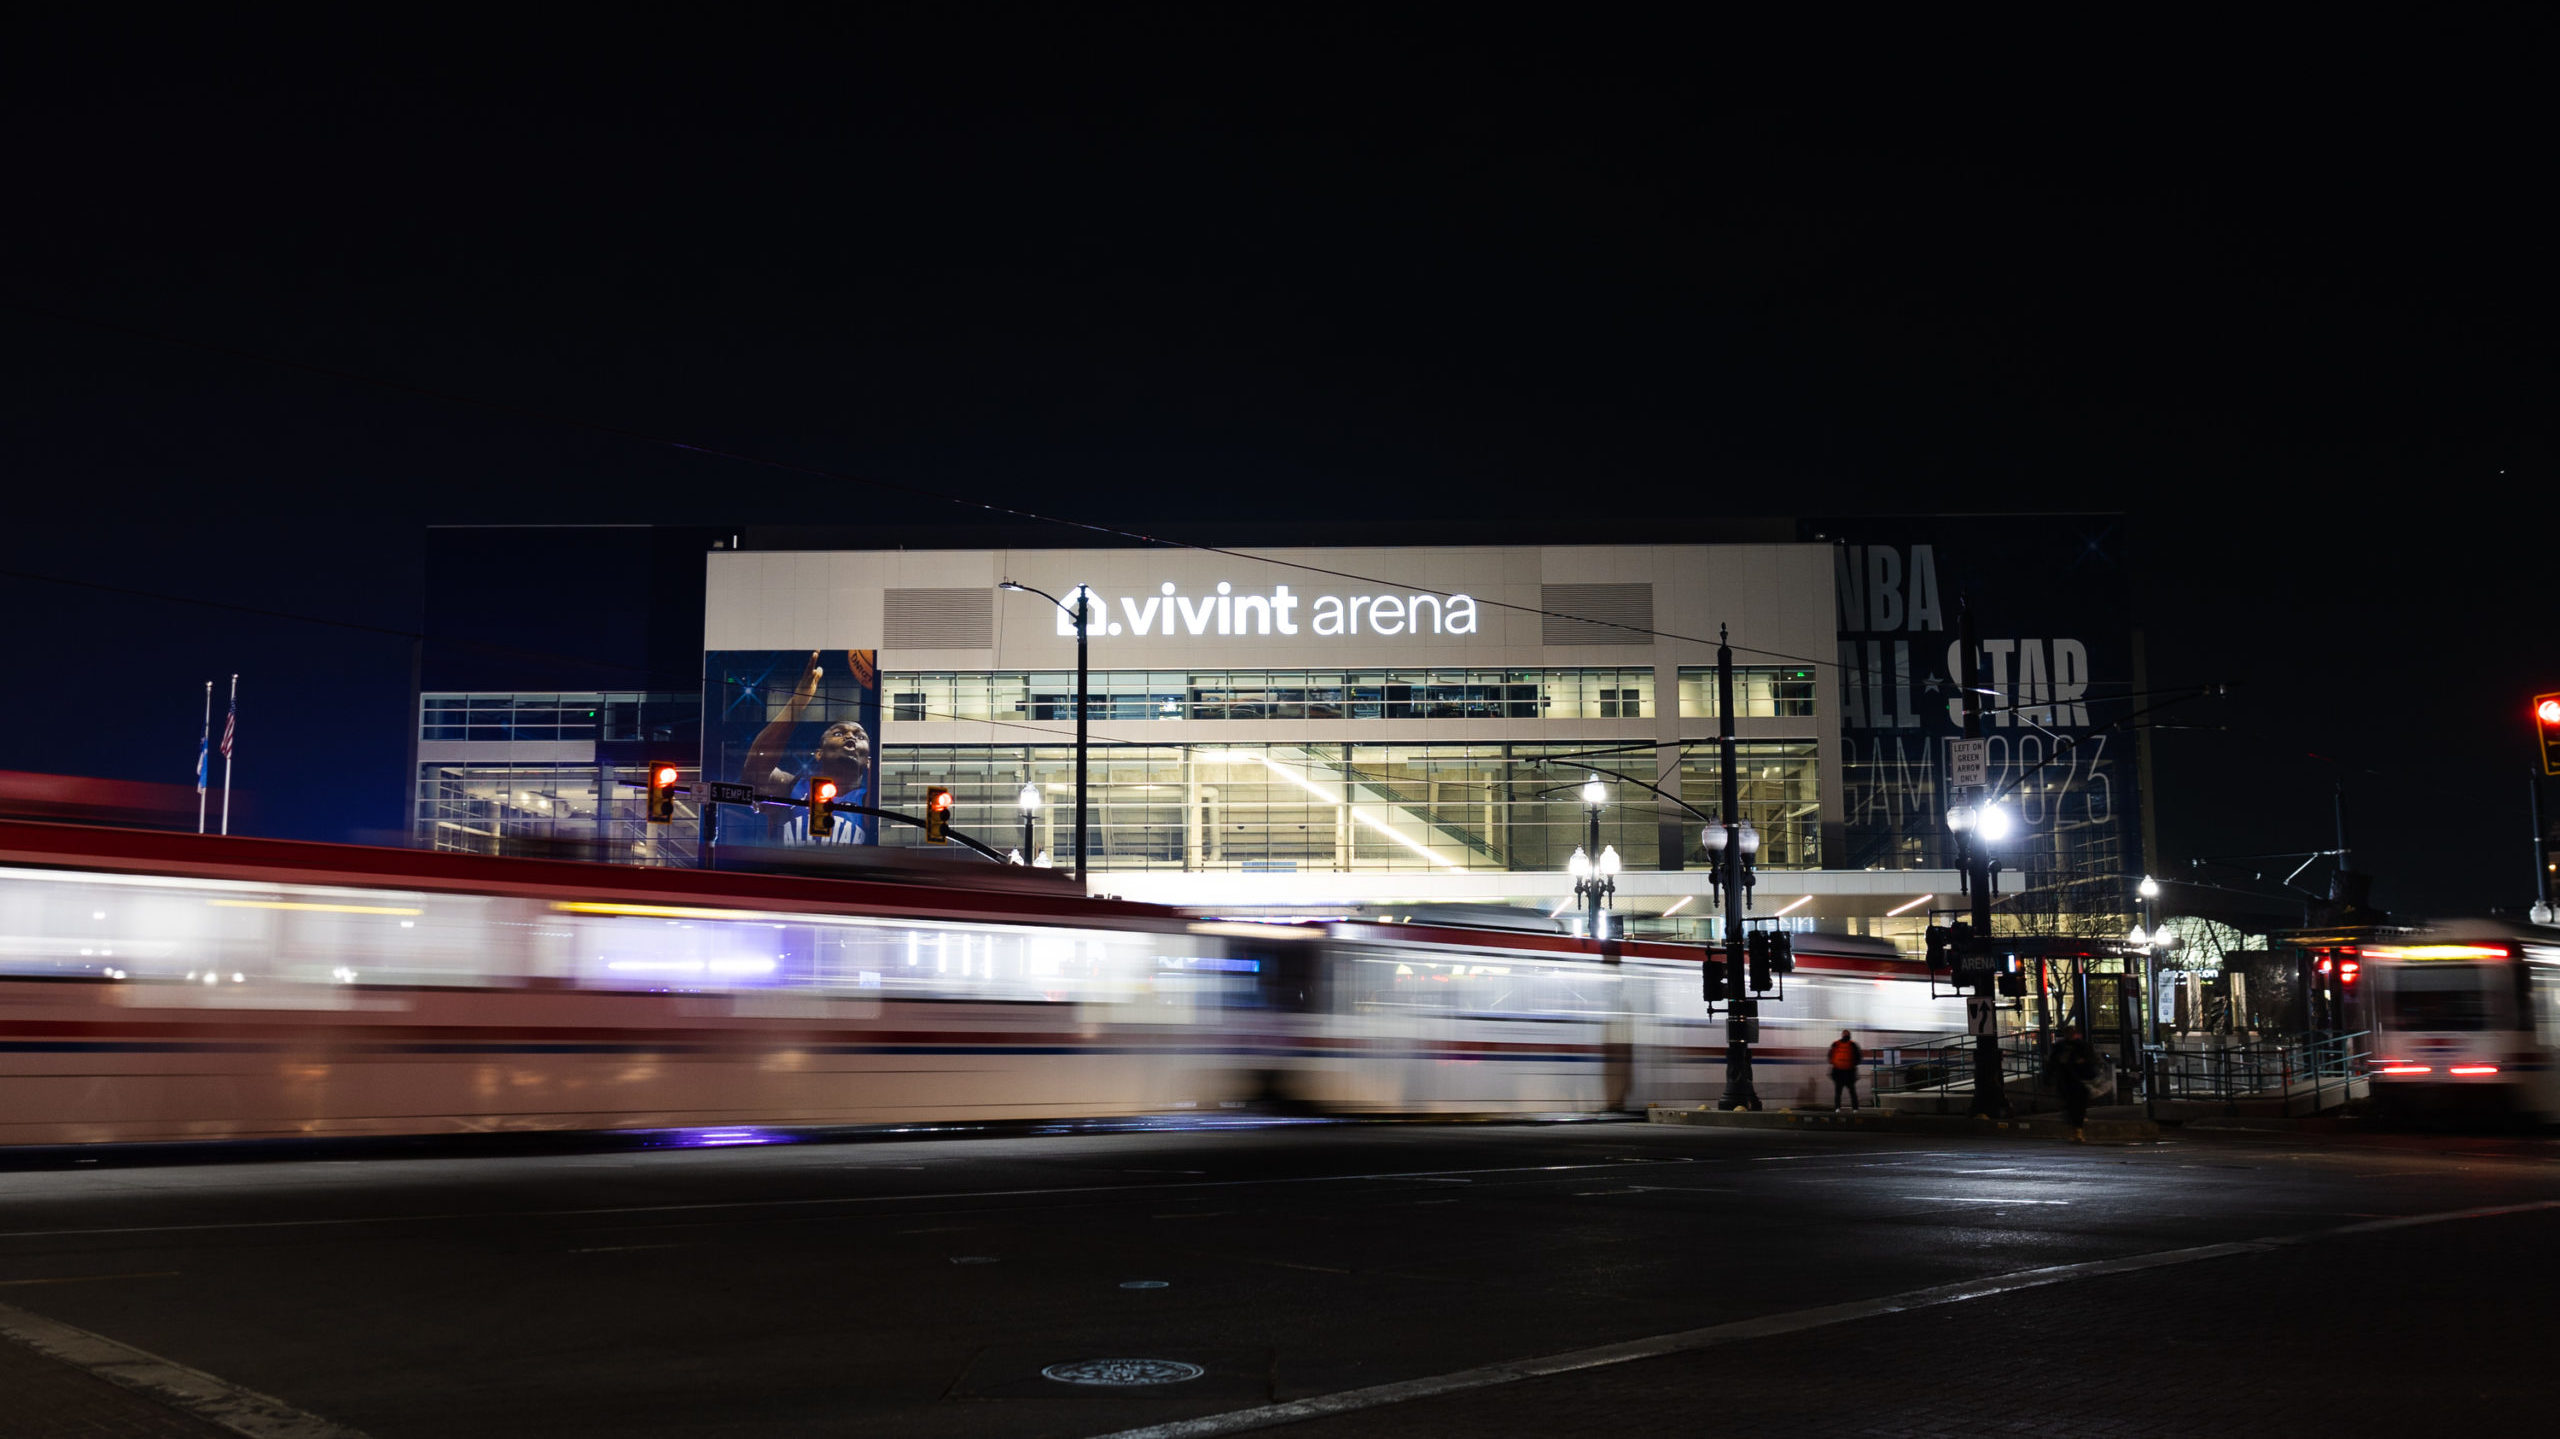 vivint is shown, all-star weekend will create a lot of traffic in salt lake...